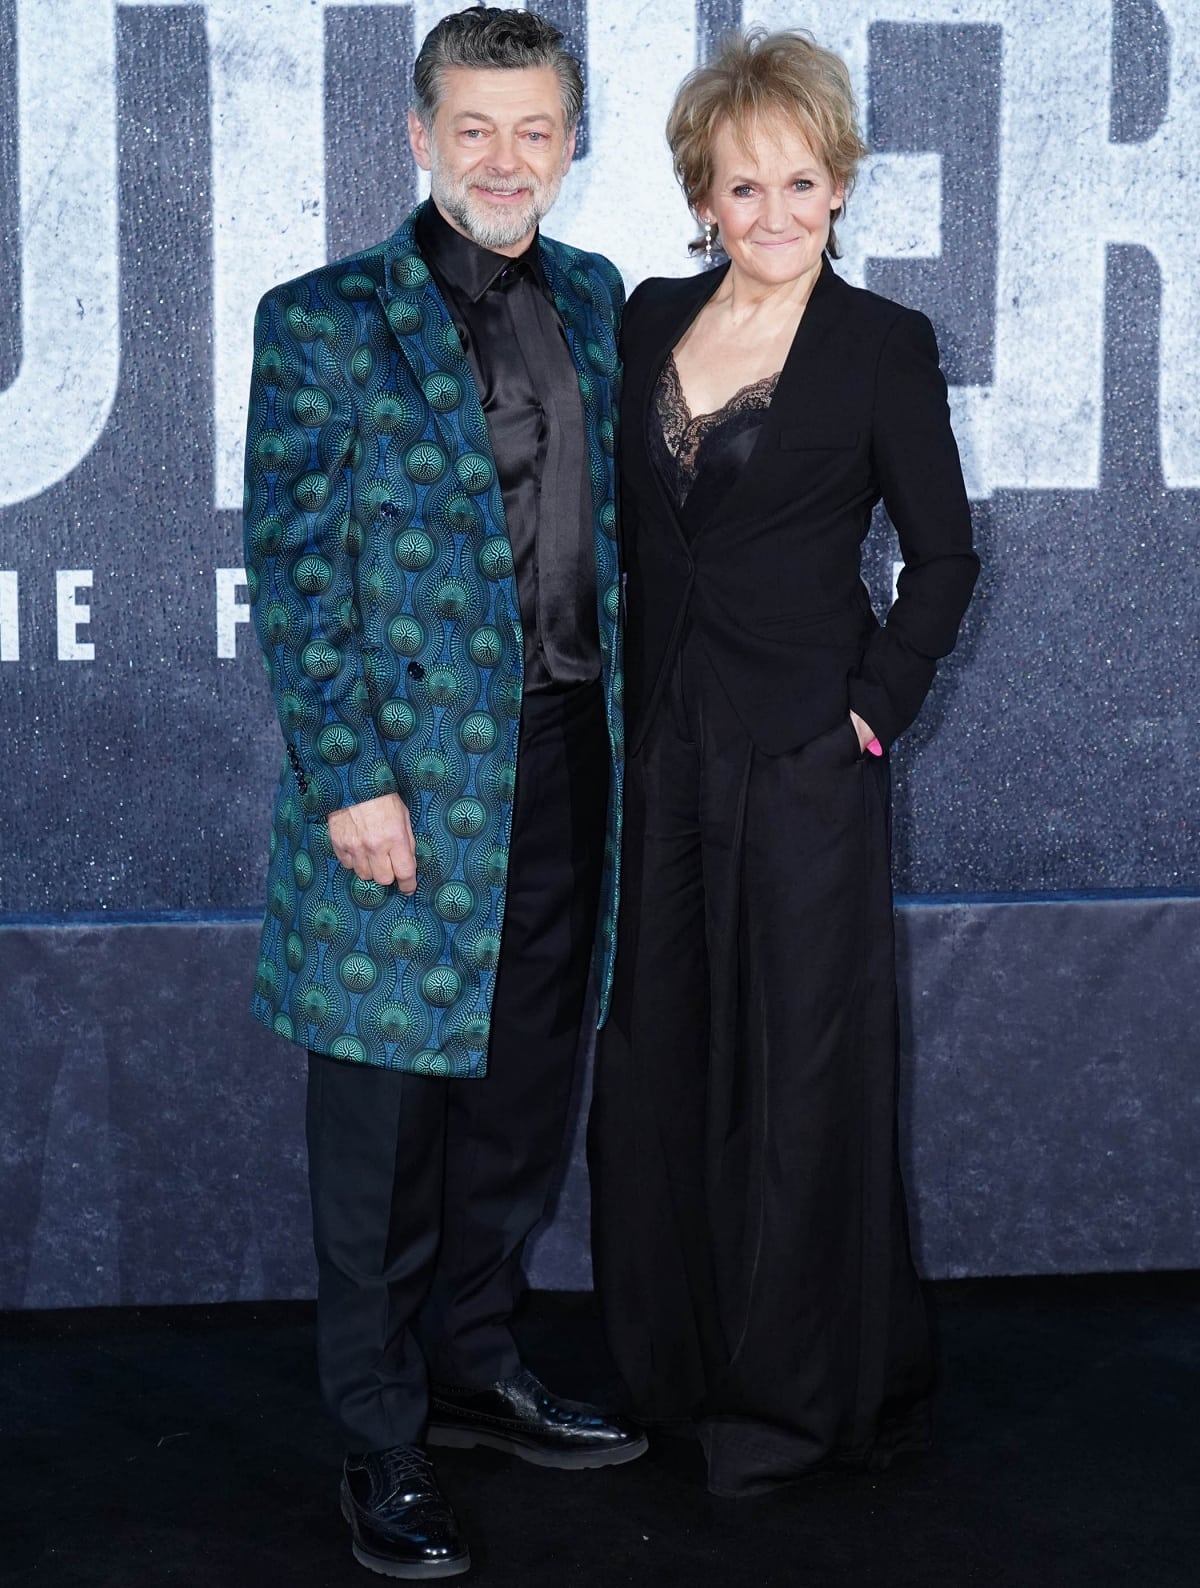 Andy Serkis cozying up to wife Lorraine Ashbourne at the world premiere of Luther: The Fallen Sun